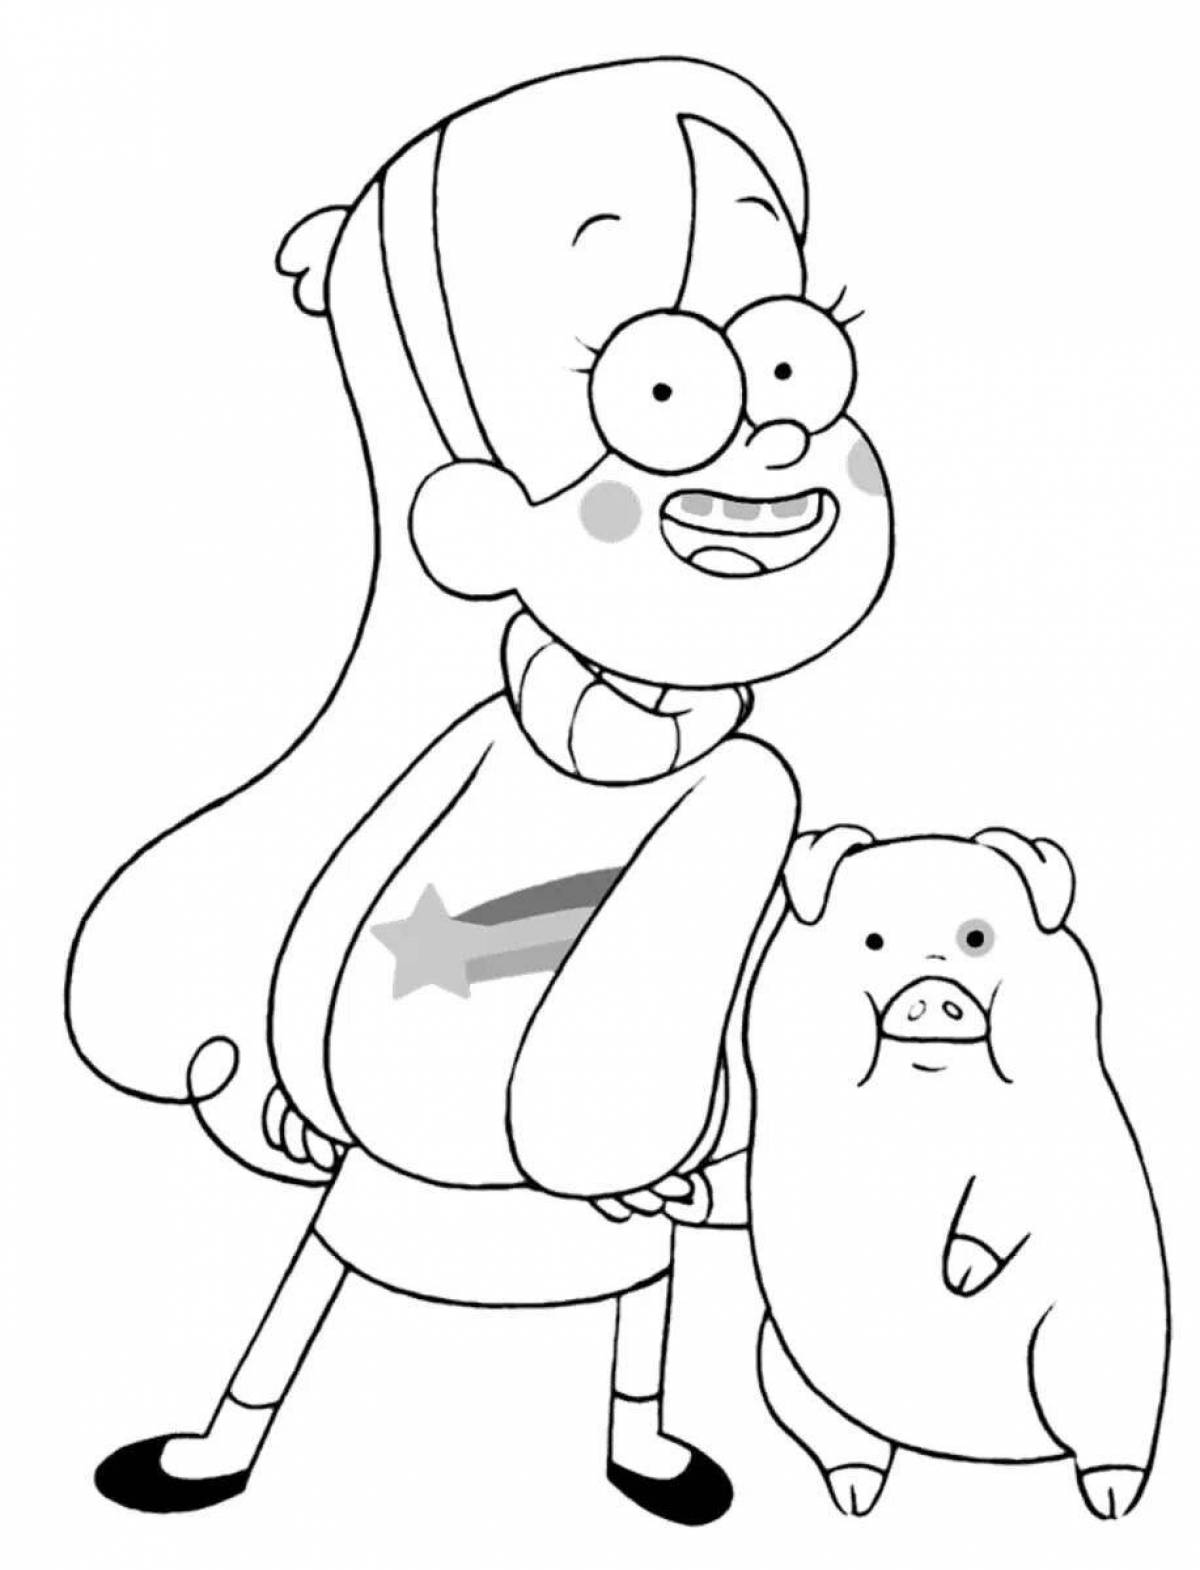 Great gravity falls light coloring page